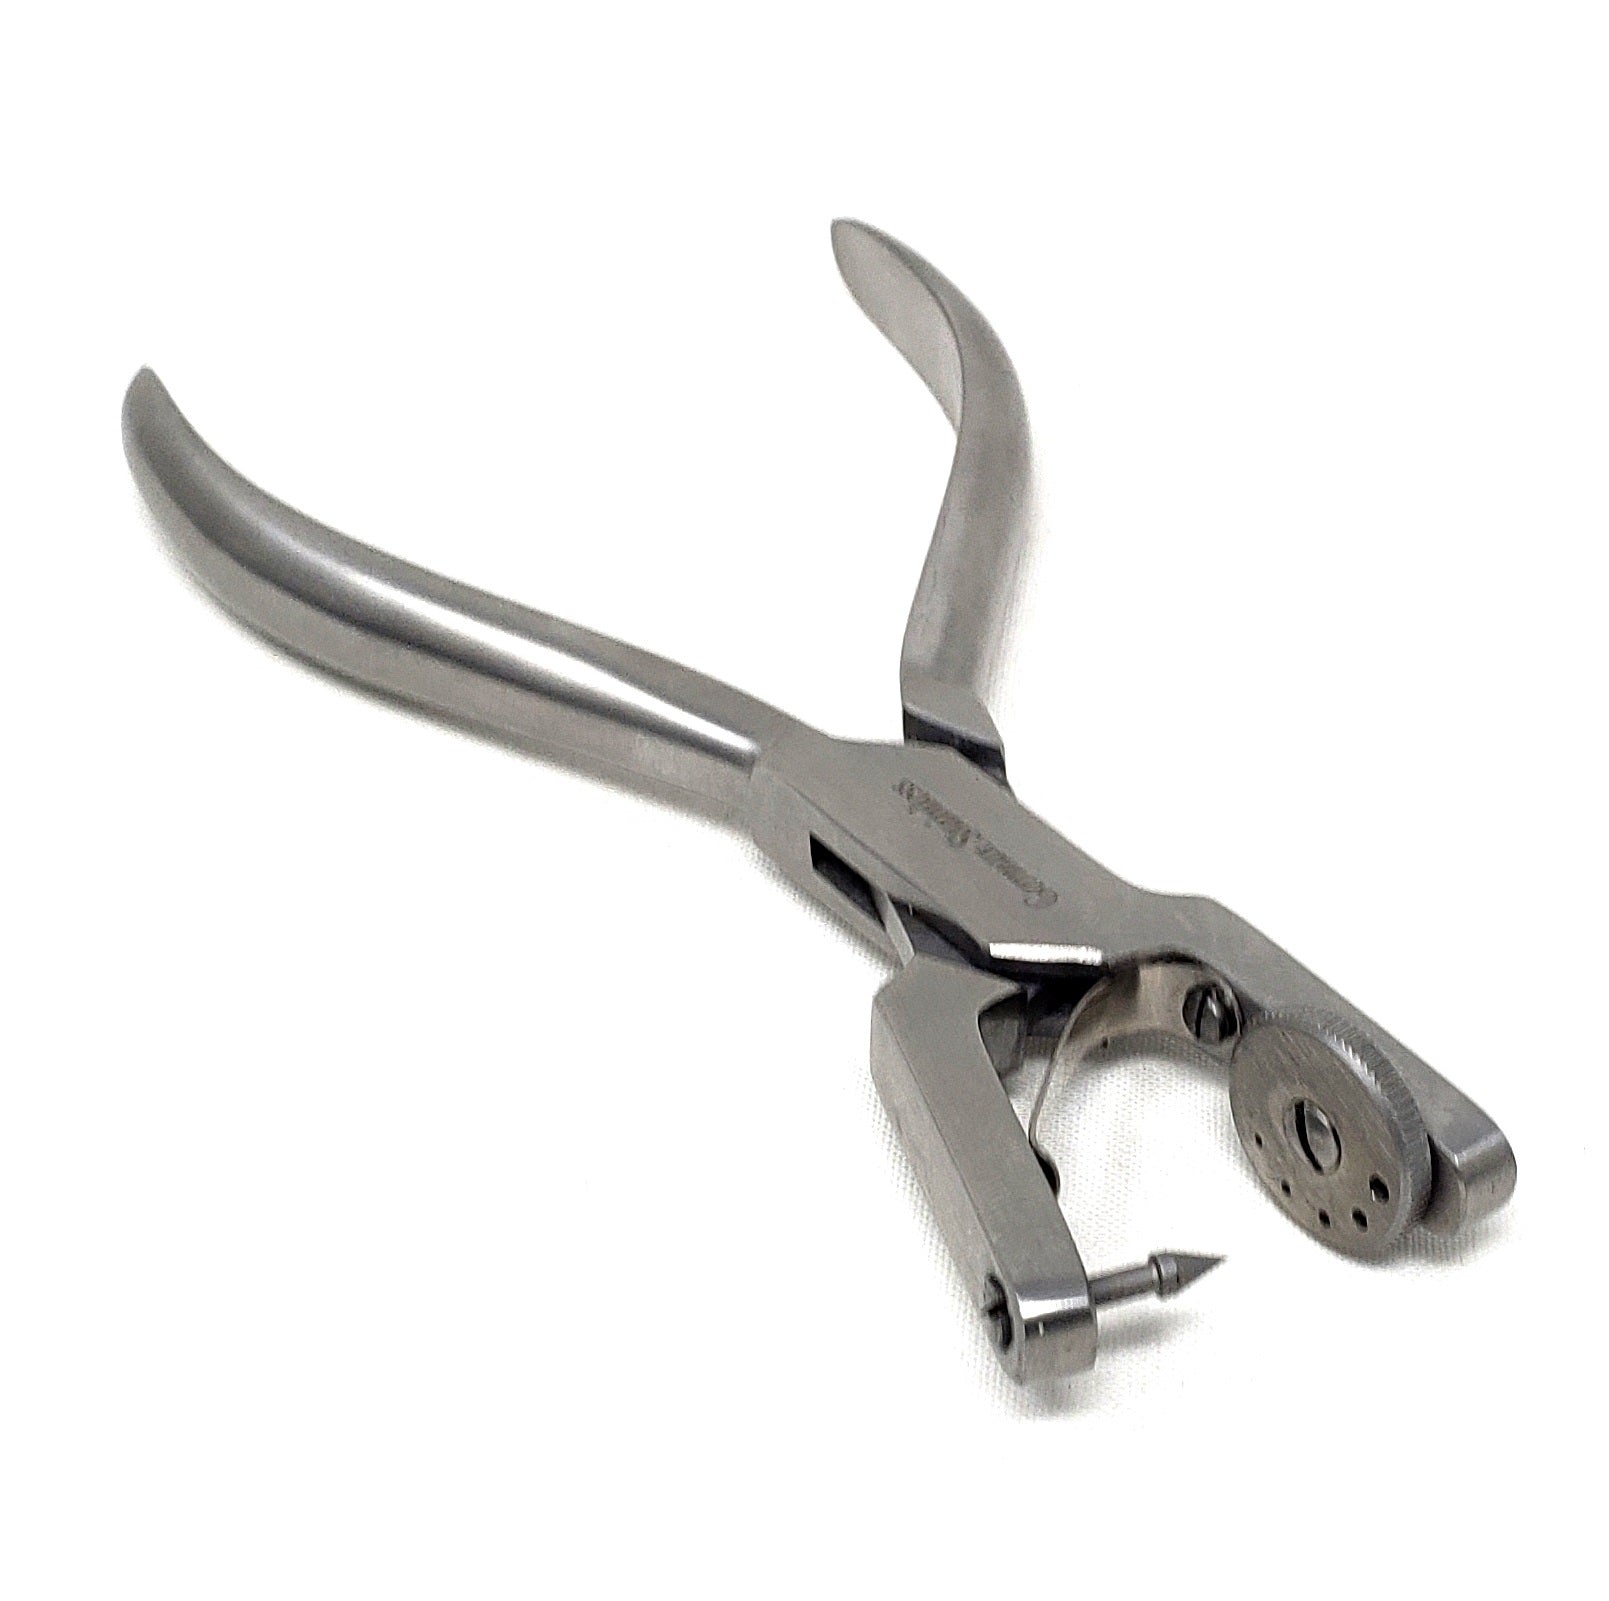 AUGUSTA Punch Pliers Metal Punch Pliers For 2mm Holes